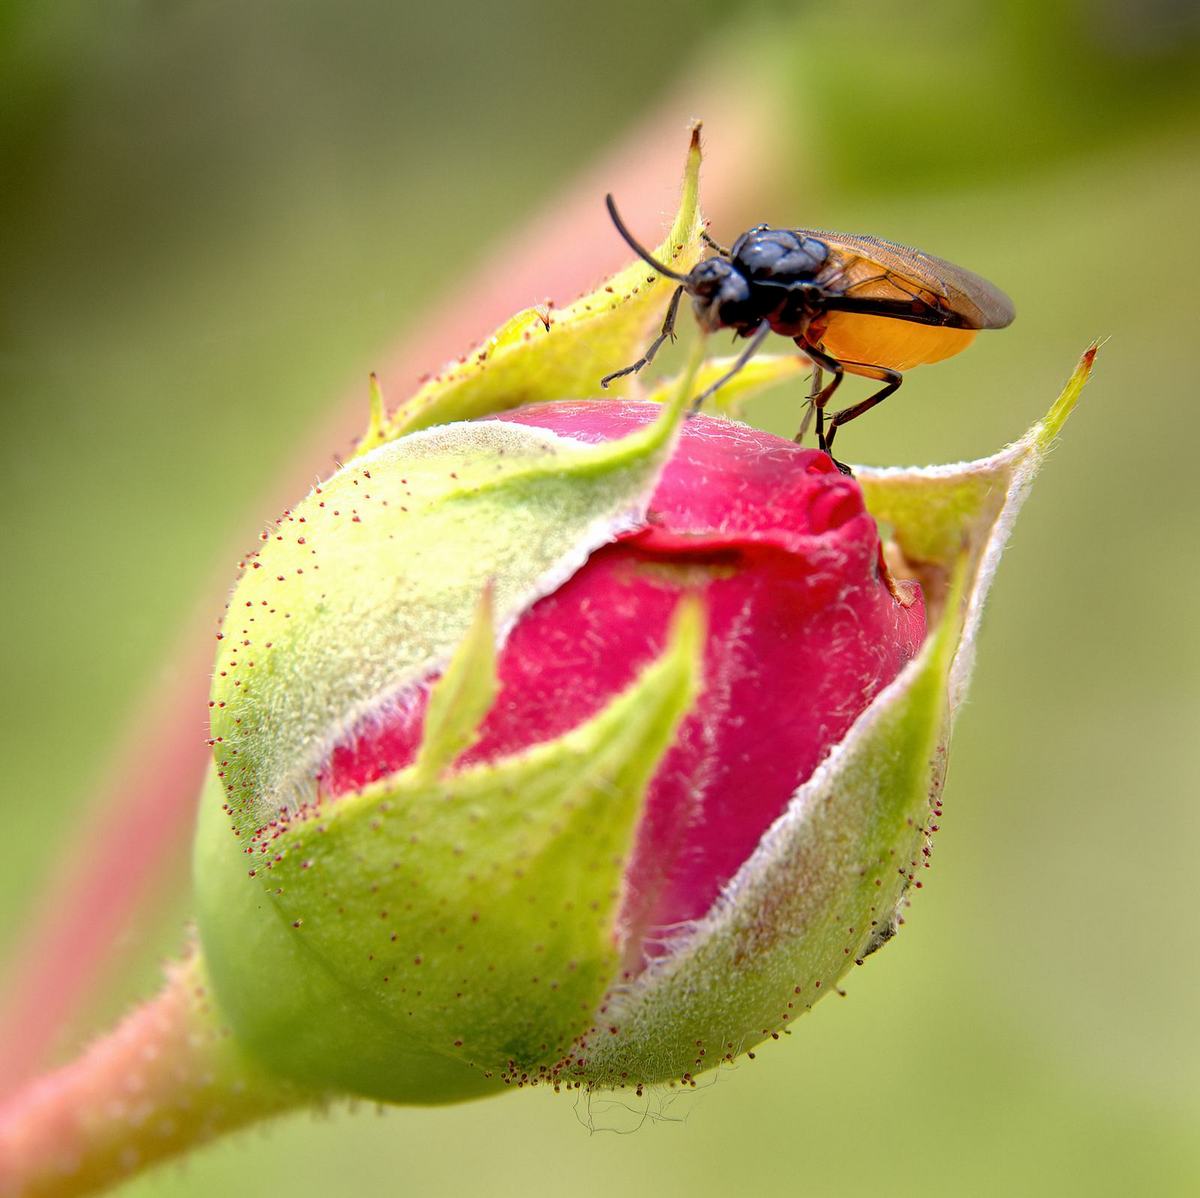 Insect on rose bud